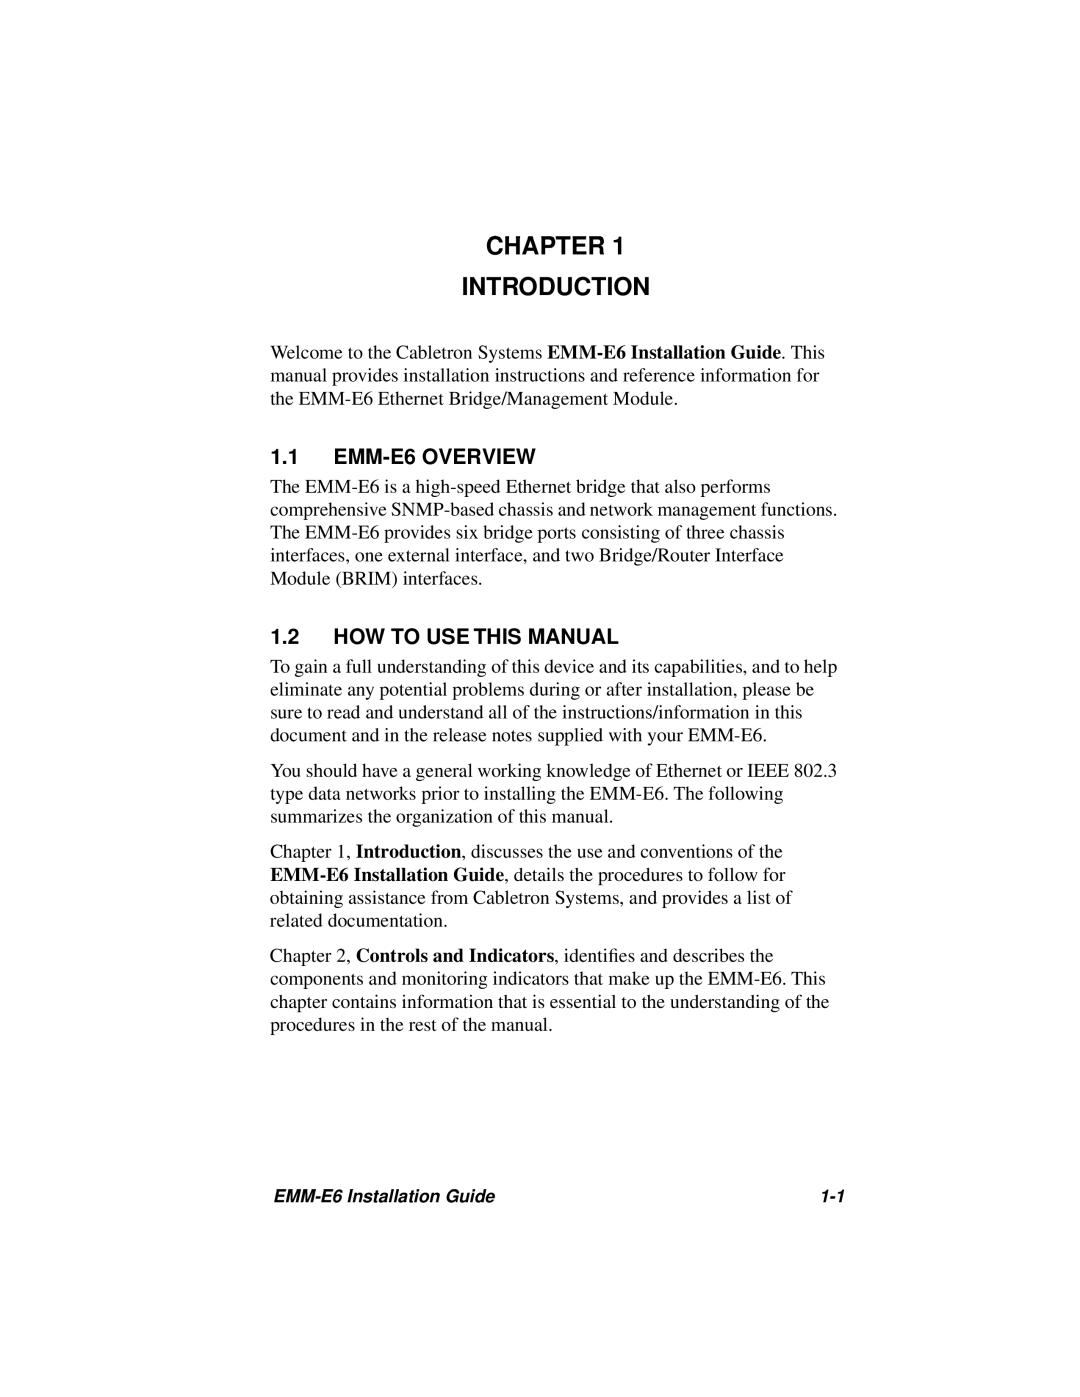 Cabletron Systems manual Chapter Introduction, EMM-E6 OVERVIEW, How To Use This Manual 